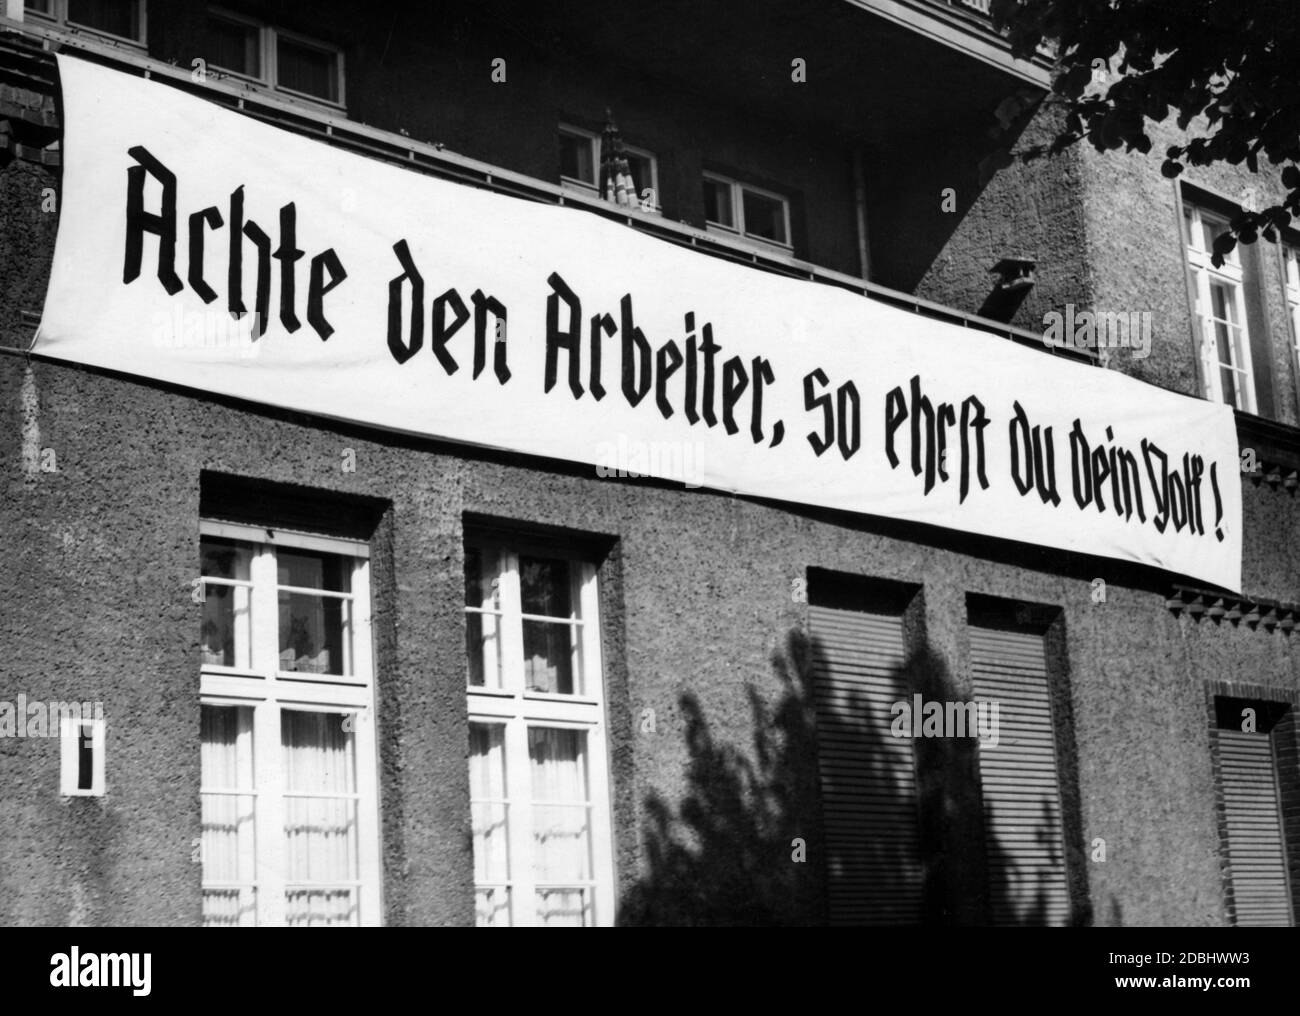 'A banner reading ''Achten den Arbeiter, so ehrst du dein Volk!'' (''Respect the worker, and honour your people!'') on the wall of a house near Tempelhofer Feld in Berlin.' Stock Photo